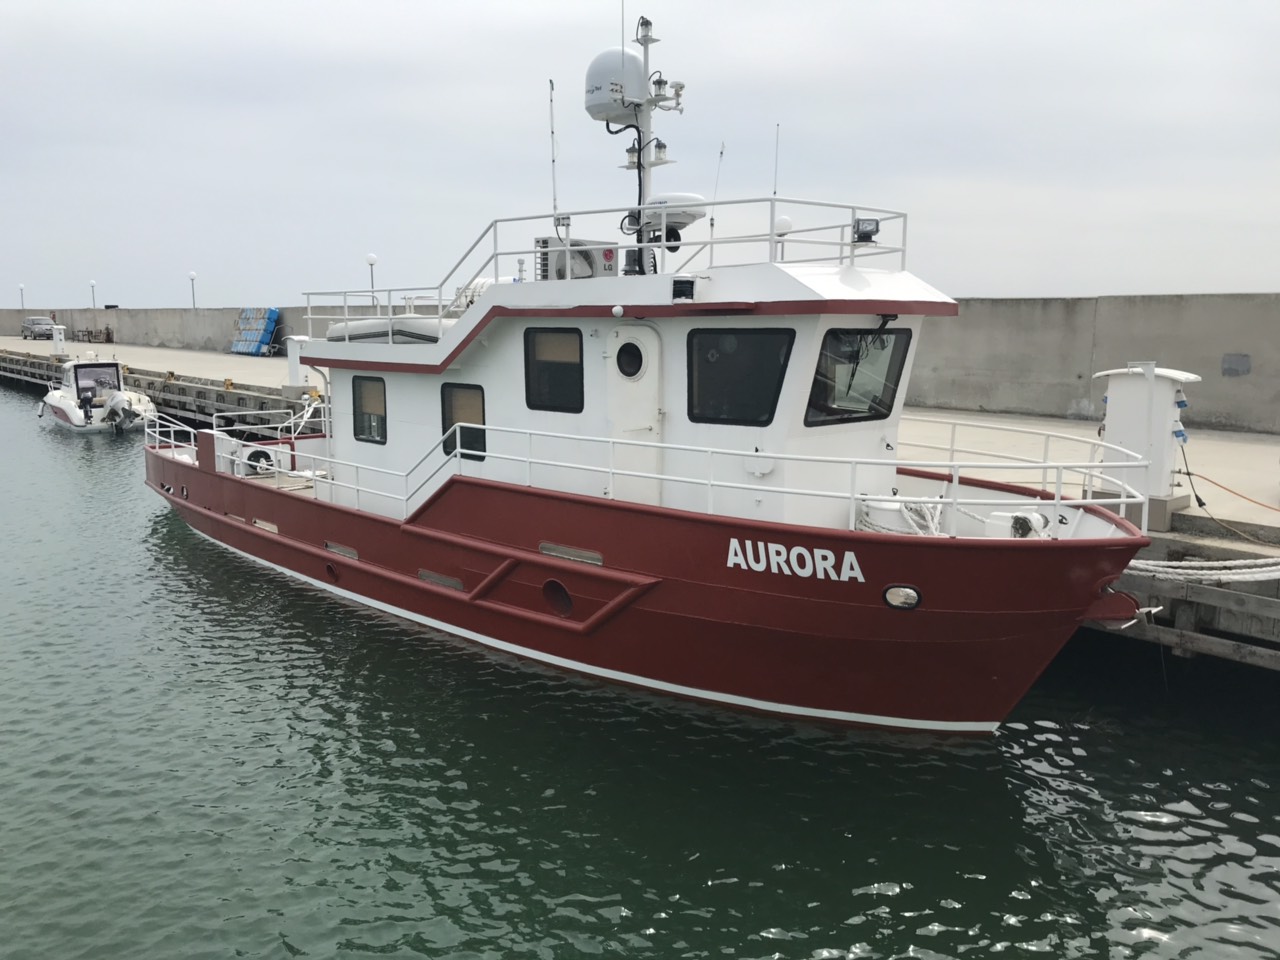 NEW BUILD 15m mini crew/ supply boat - withdrawn - Welcome to ...